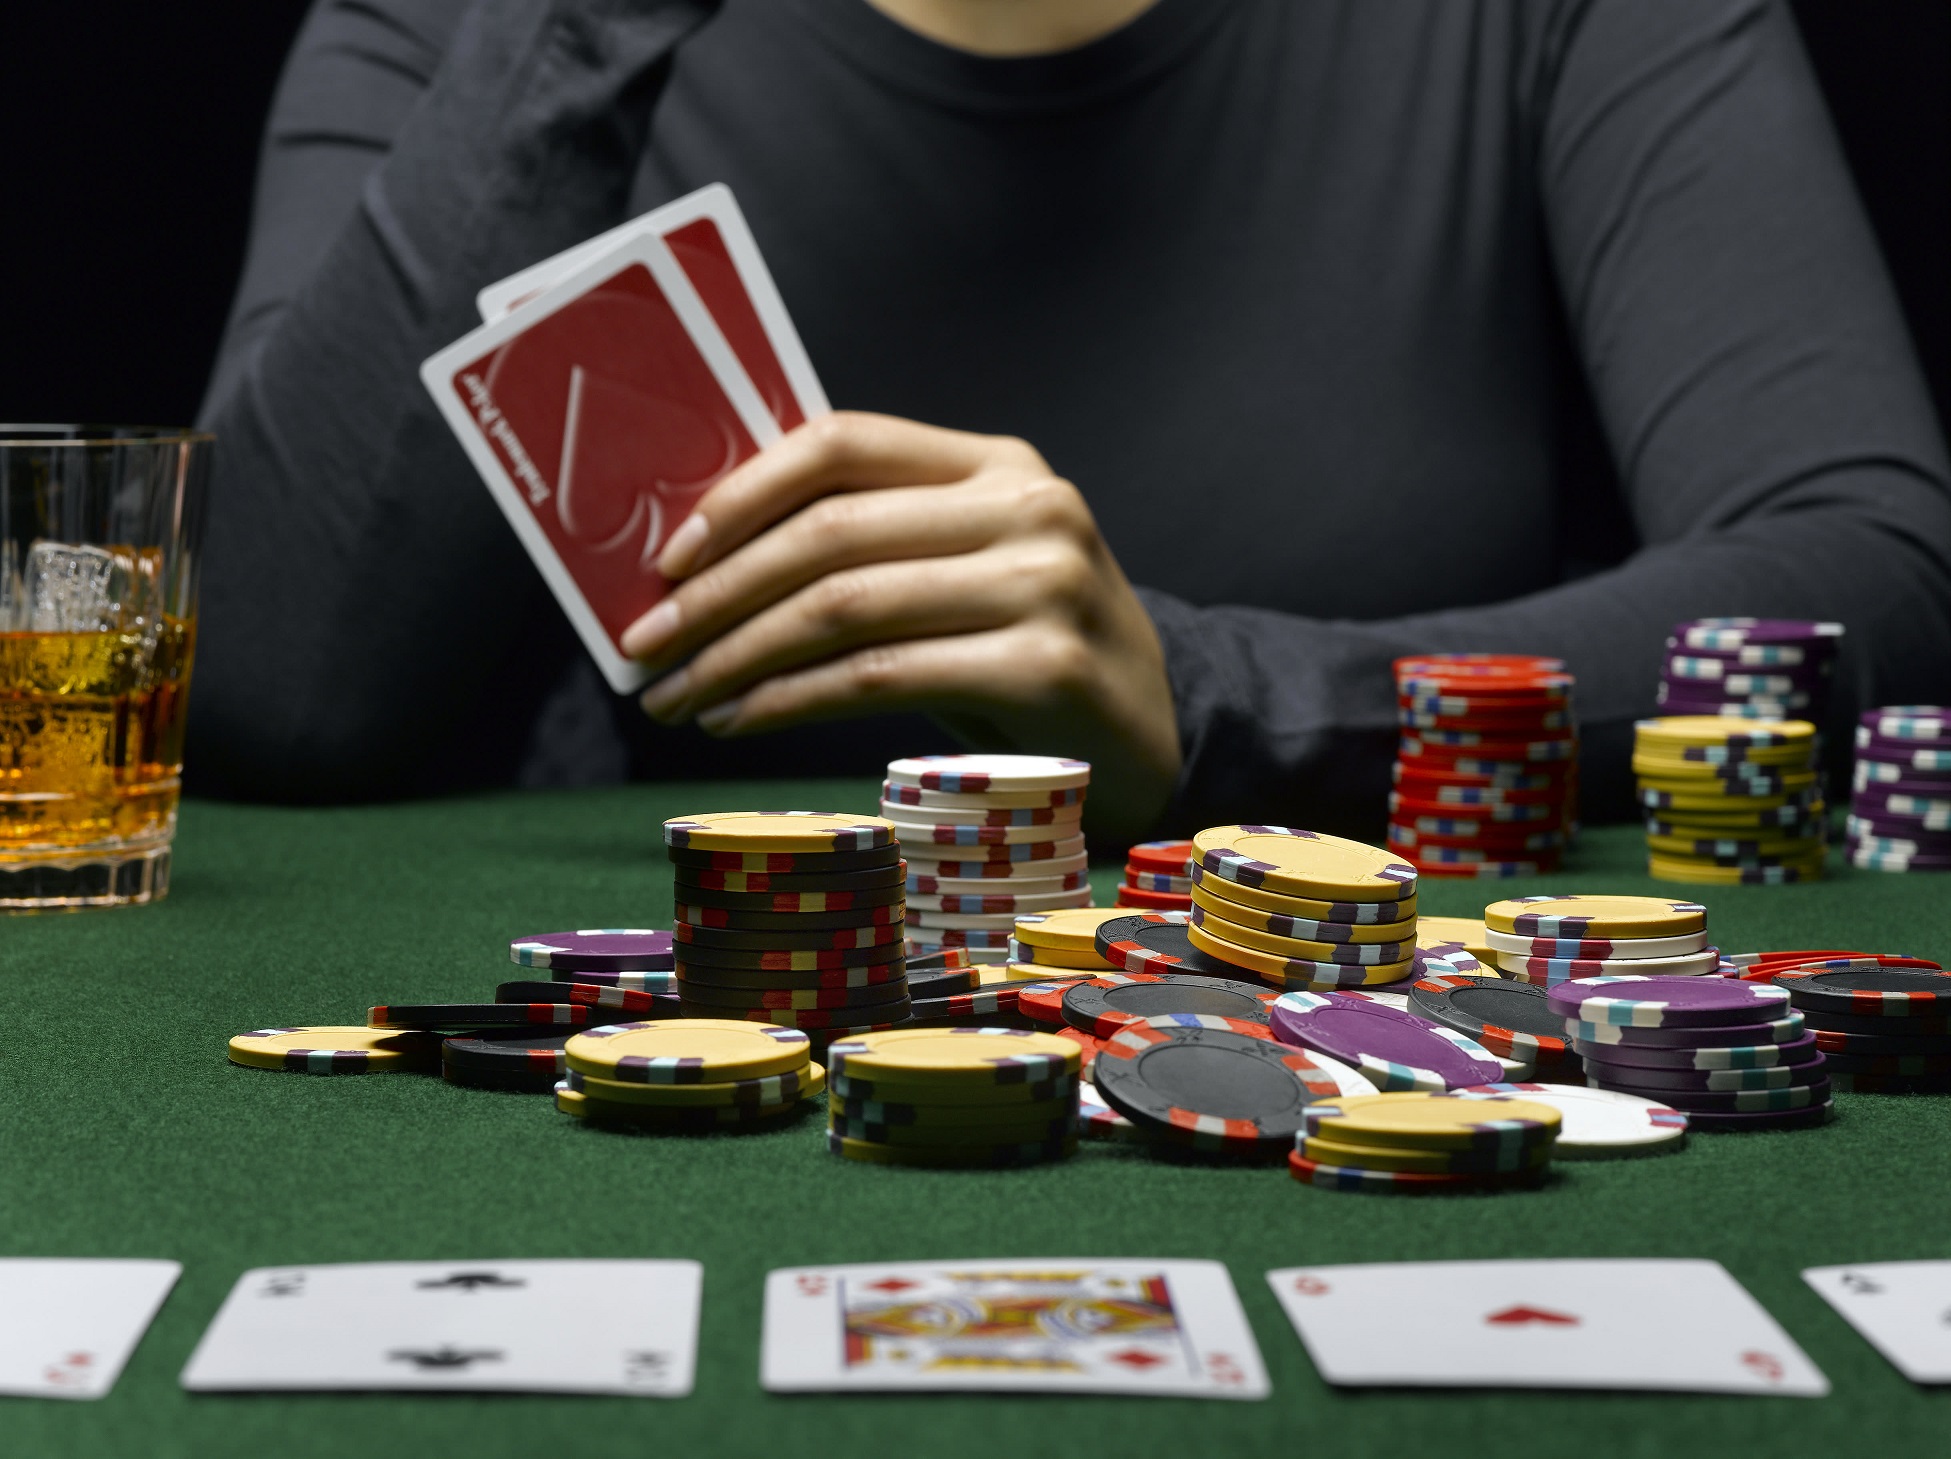 How to bluff and get away with it in bandarq games?